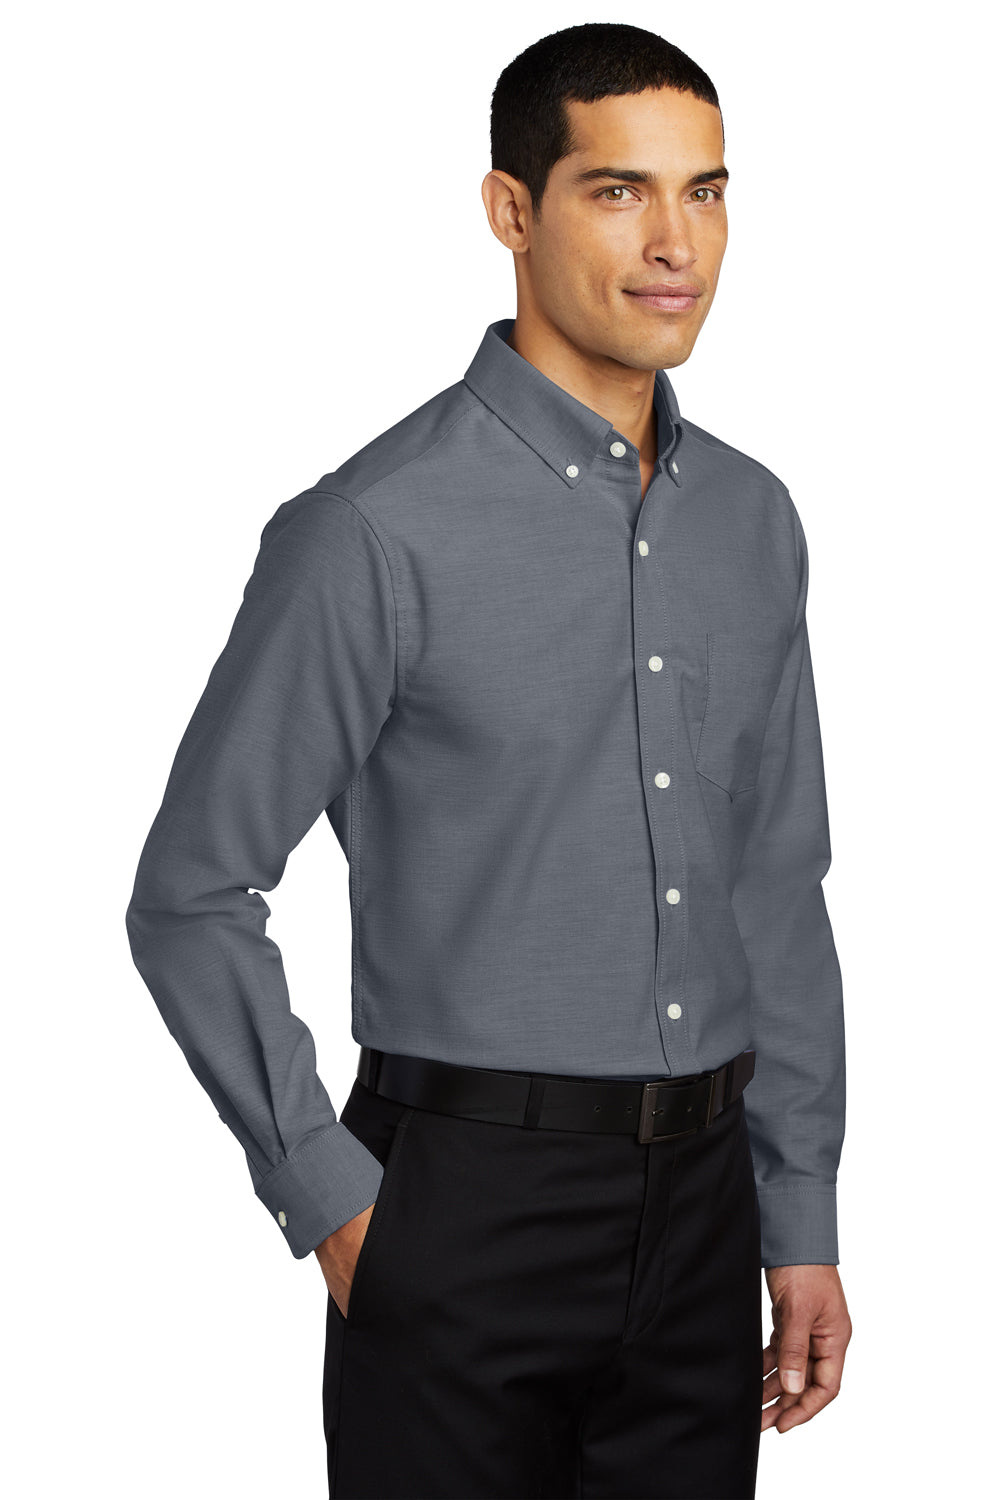 Port Authority S658/TS658 SuperPro Oxford Wrinkle Resistant Long Sleeve Button Down Shirt w/ Pocket Black 3Q